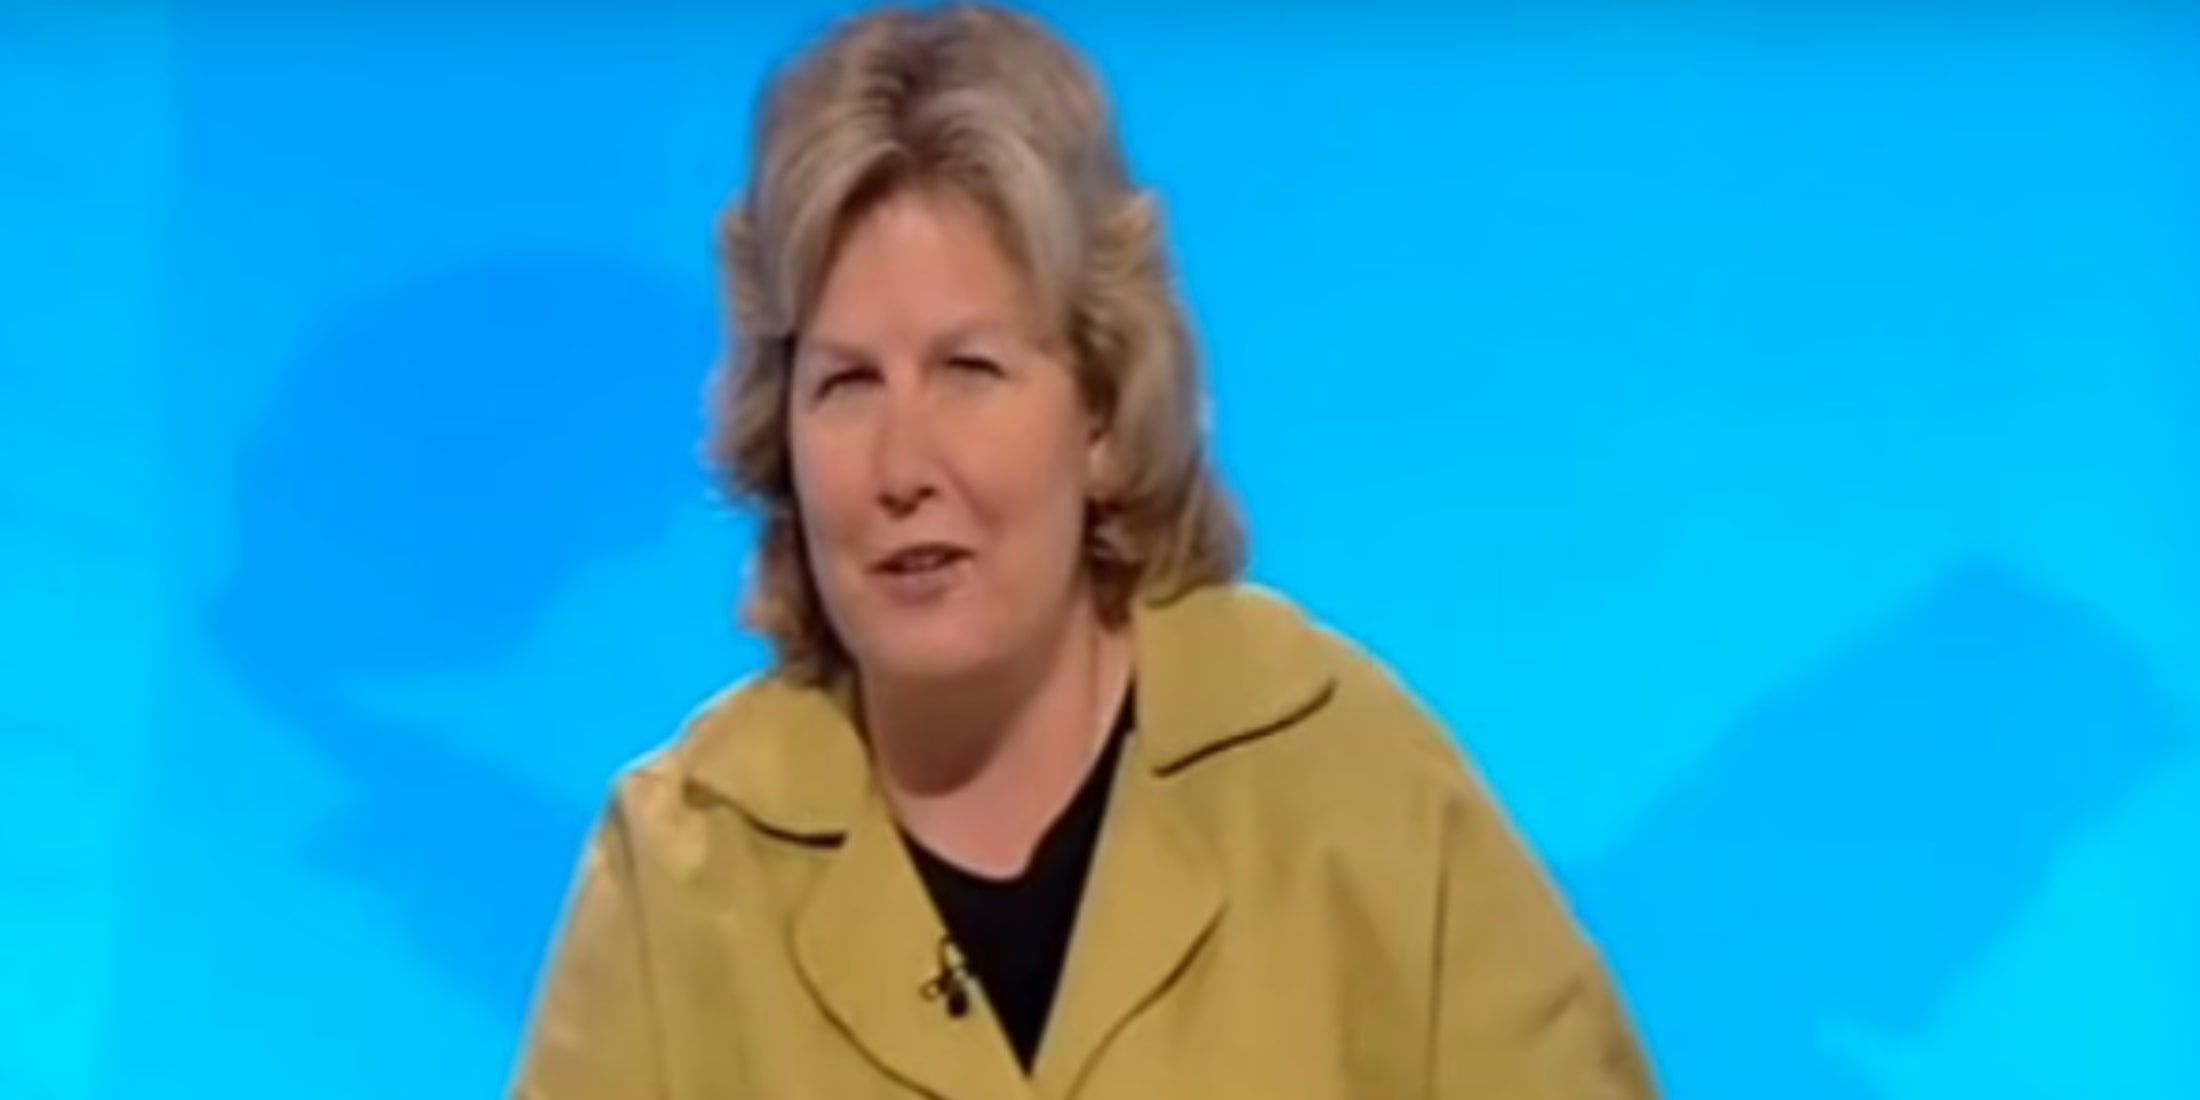 Sandy Toksvig hosting the British Panel show What the Dickens